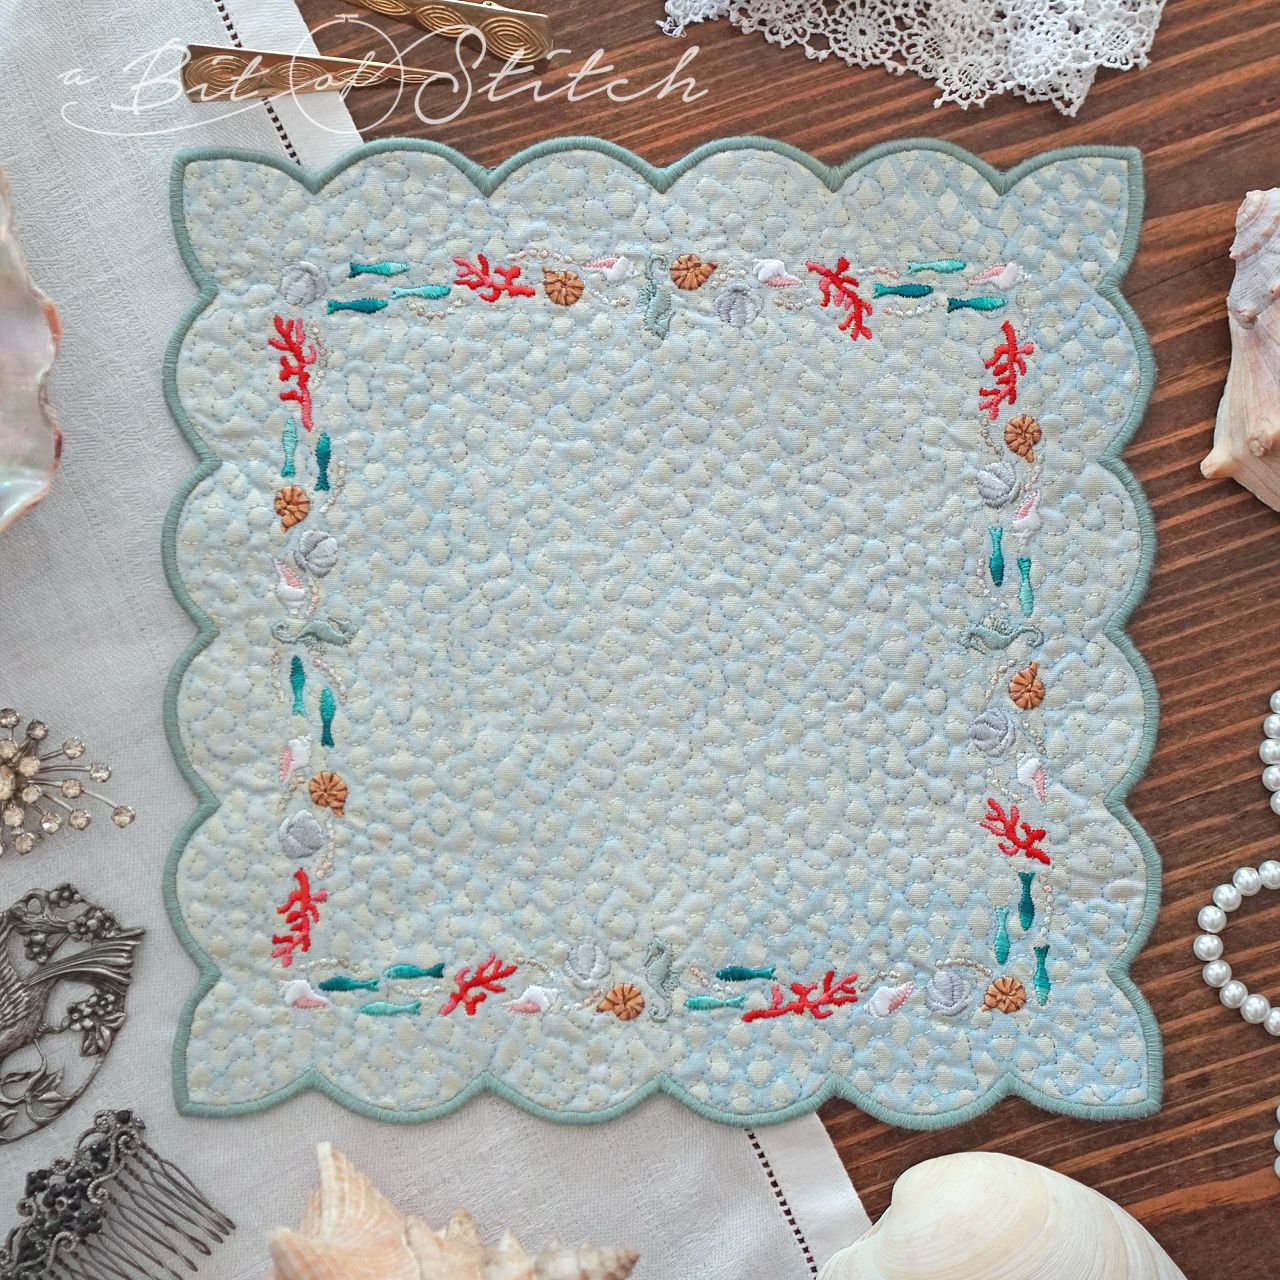 Sea ocean beach themed square frame embroidery design on made in the hoop square scallop edged doily - machine embroidery designs by A Bit of Stitch